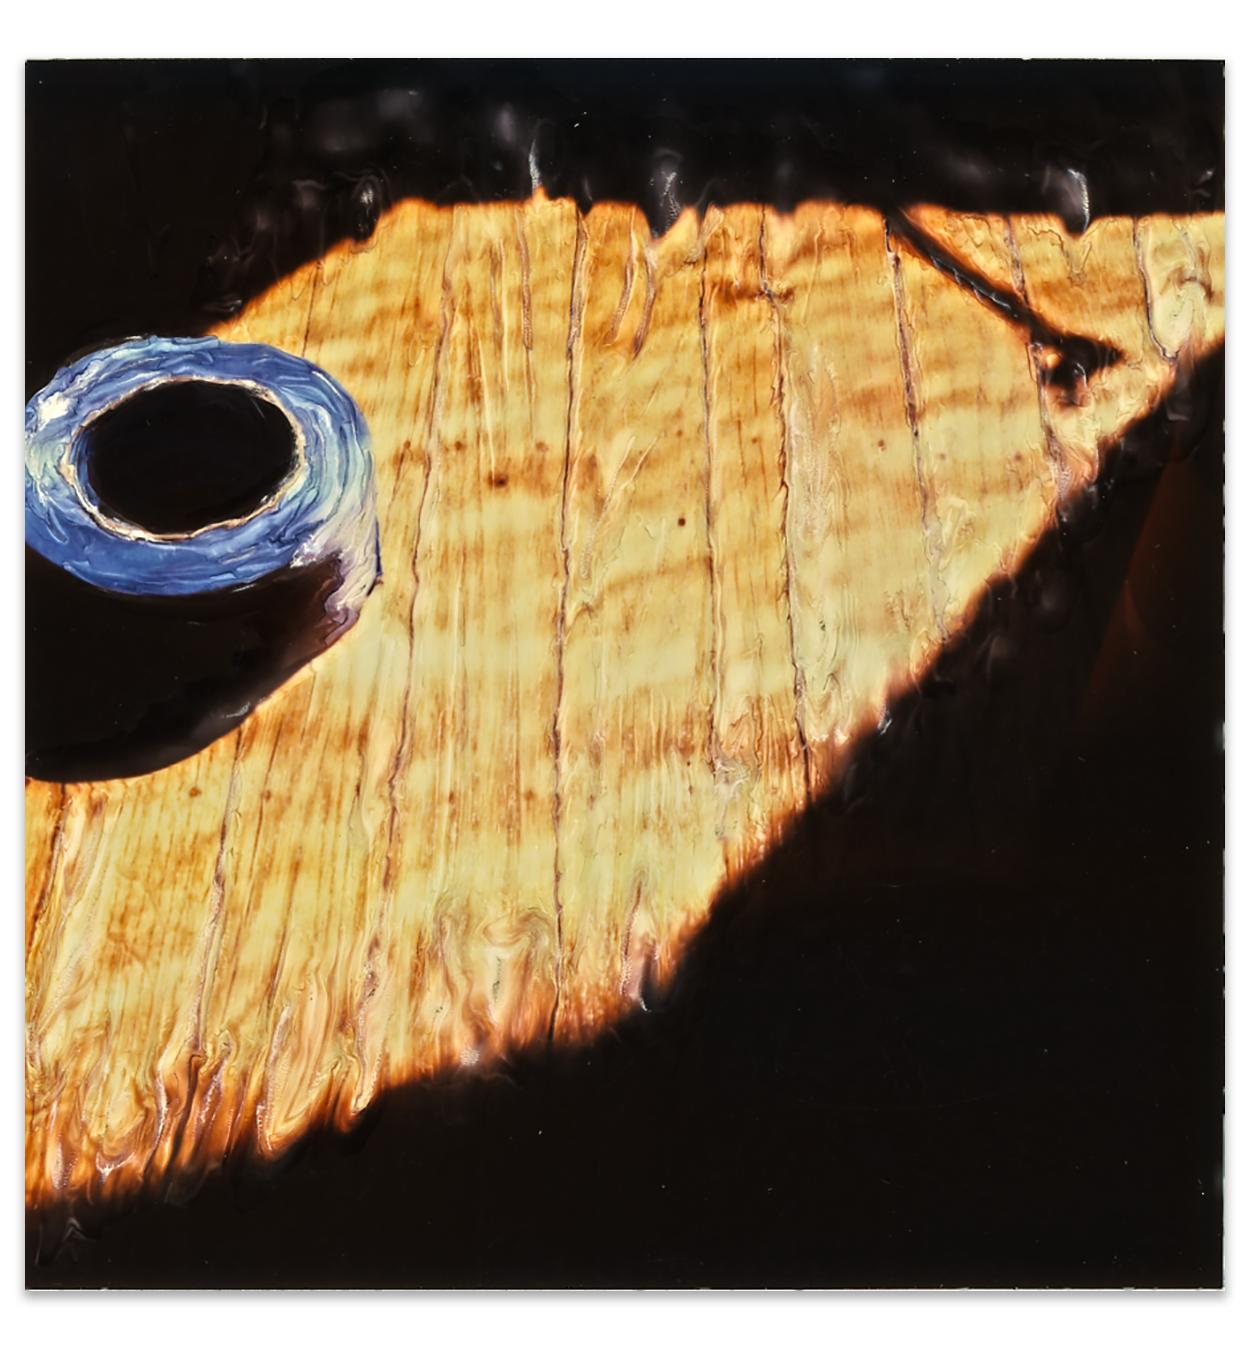 Blue tape in the sunshine